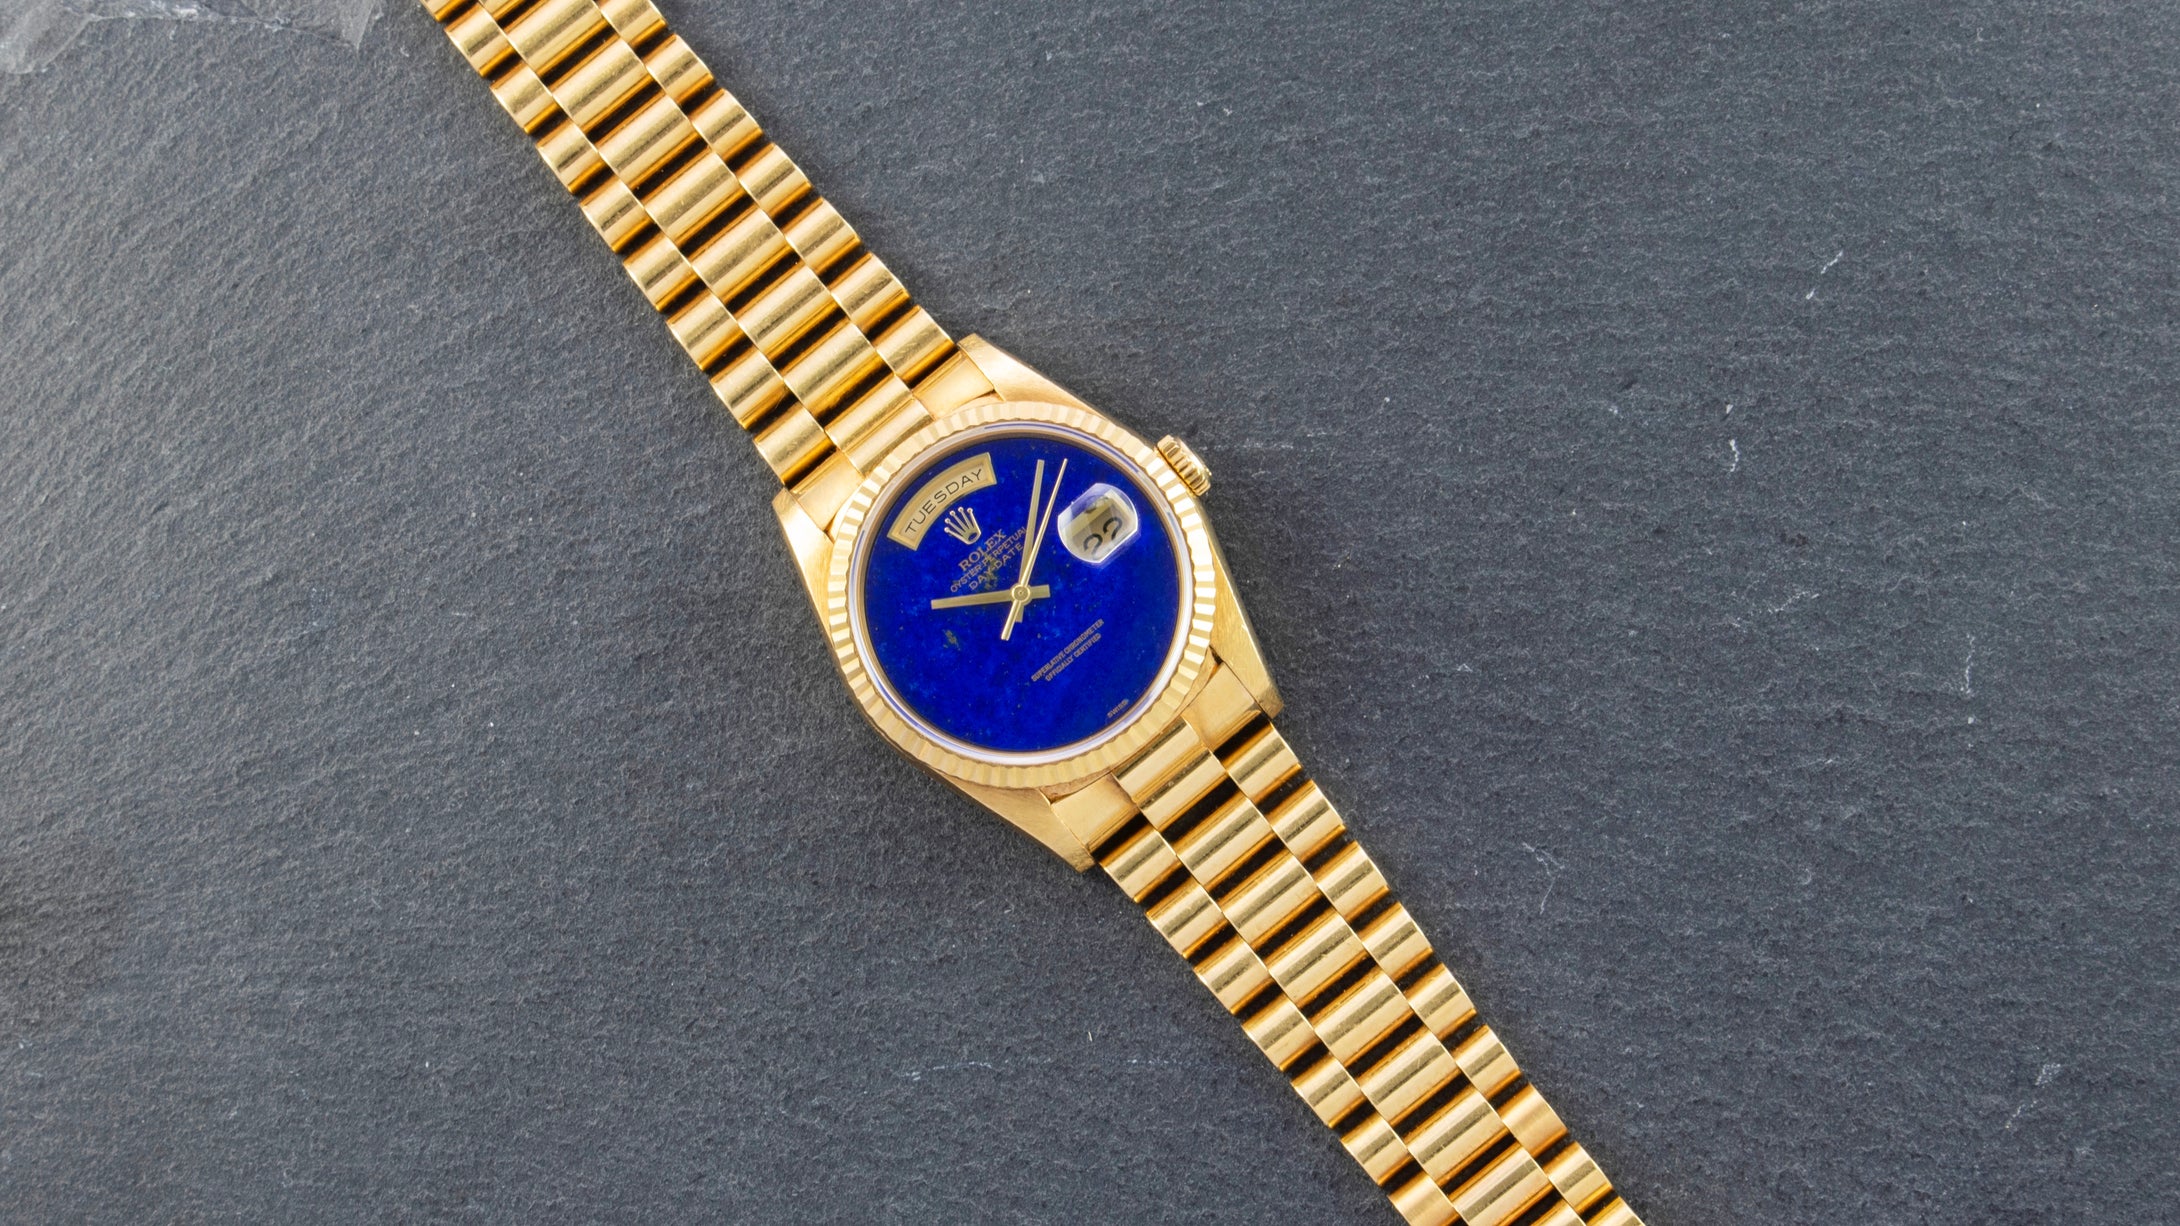 Rolex 18K Yellow Gold Oyster Perpetual Day-Date President with Lapis Lazuli Dial Watch | Veralet